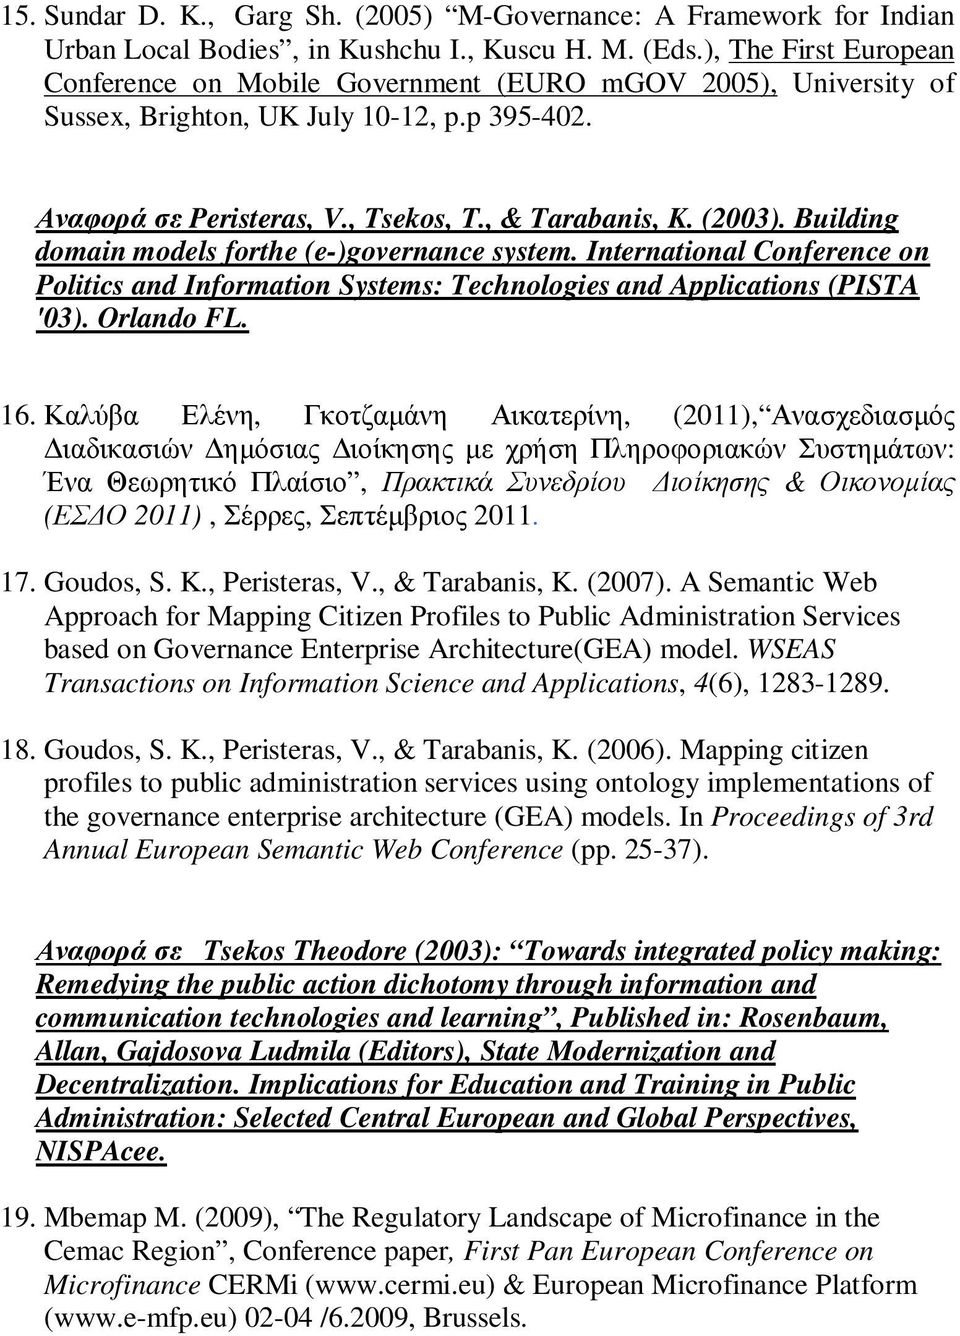 Building domain models forthe (e-)governance system. International Conference on Politics and Information Systems: Technologies and Applications (PISTA '03). Orlando FL. 16.